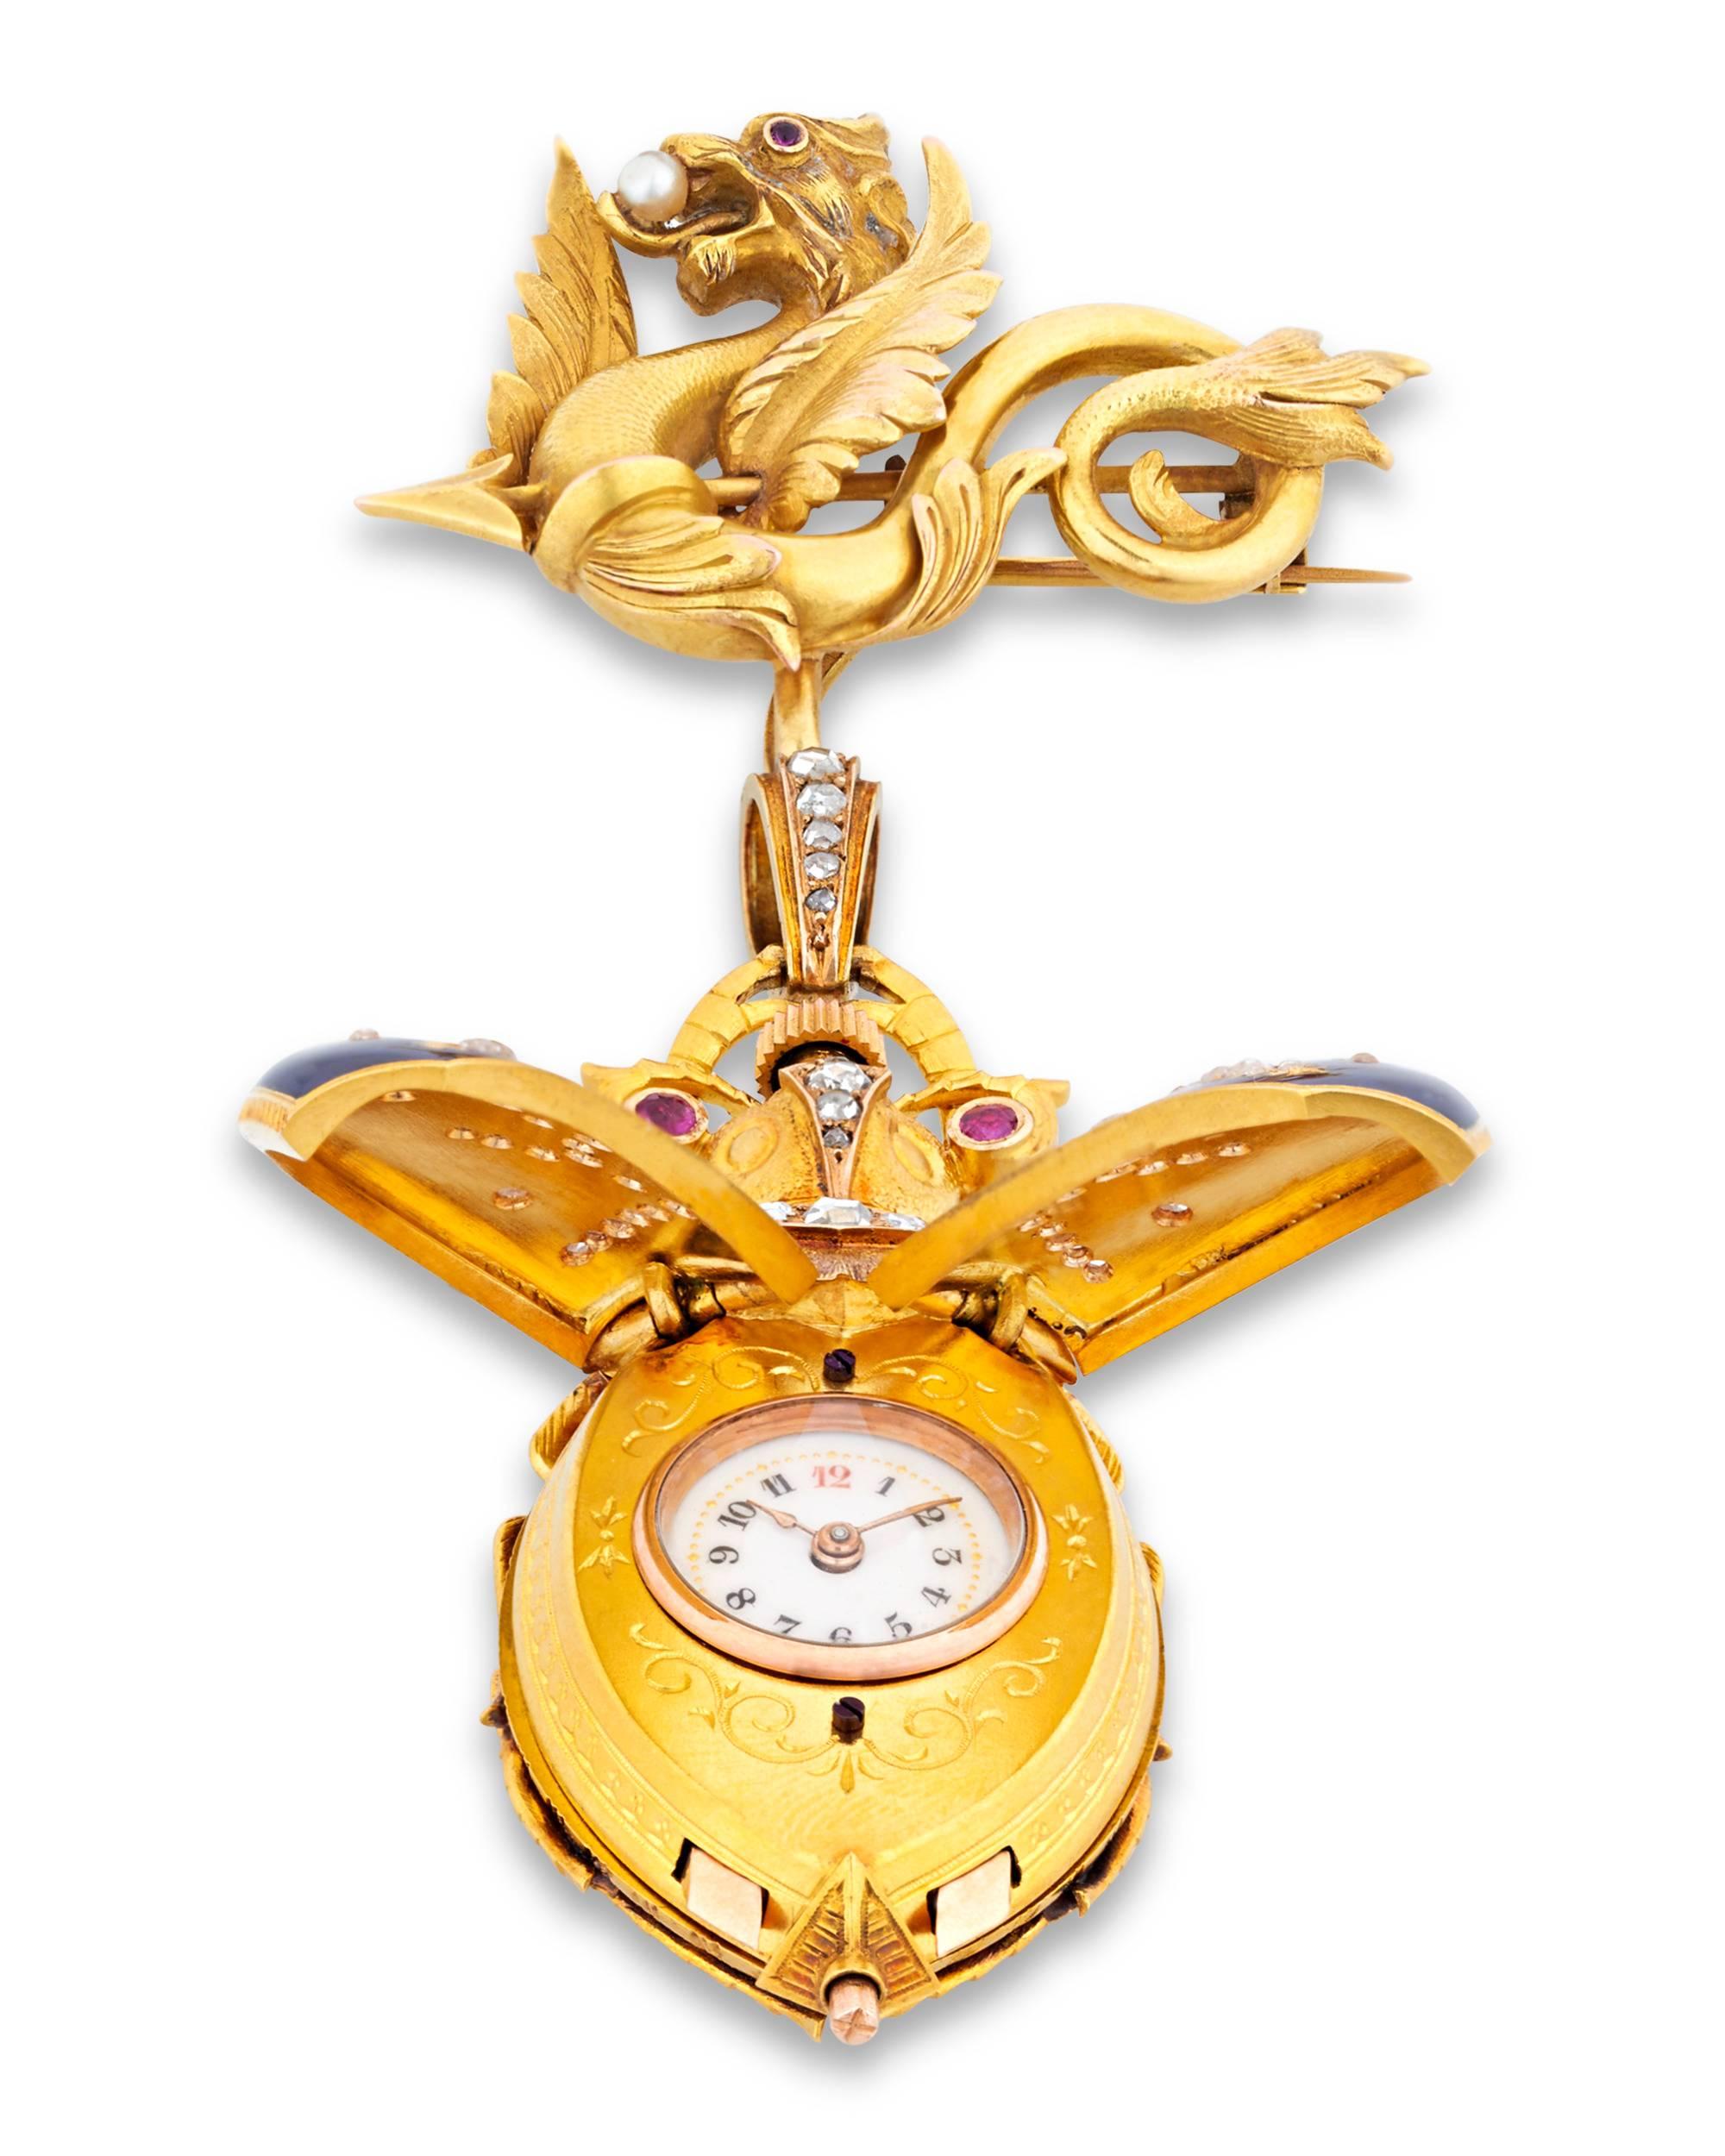 This masterfully crafted Swiss gold lapel watch is an exemplary specimen of Swiss workmanship. Taking the form of an exotic scarab, the enchanting timepiece is formed of meticulously worked 18K gold with exquisite guilloché enameling. A simple press